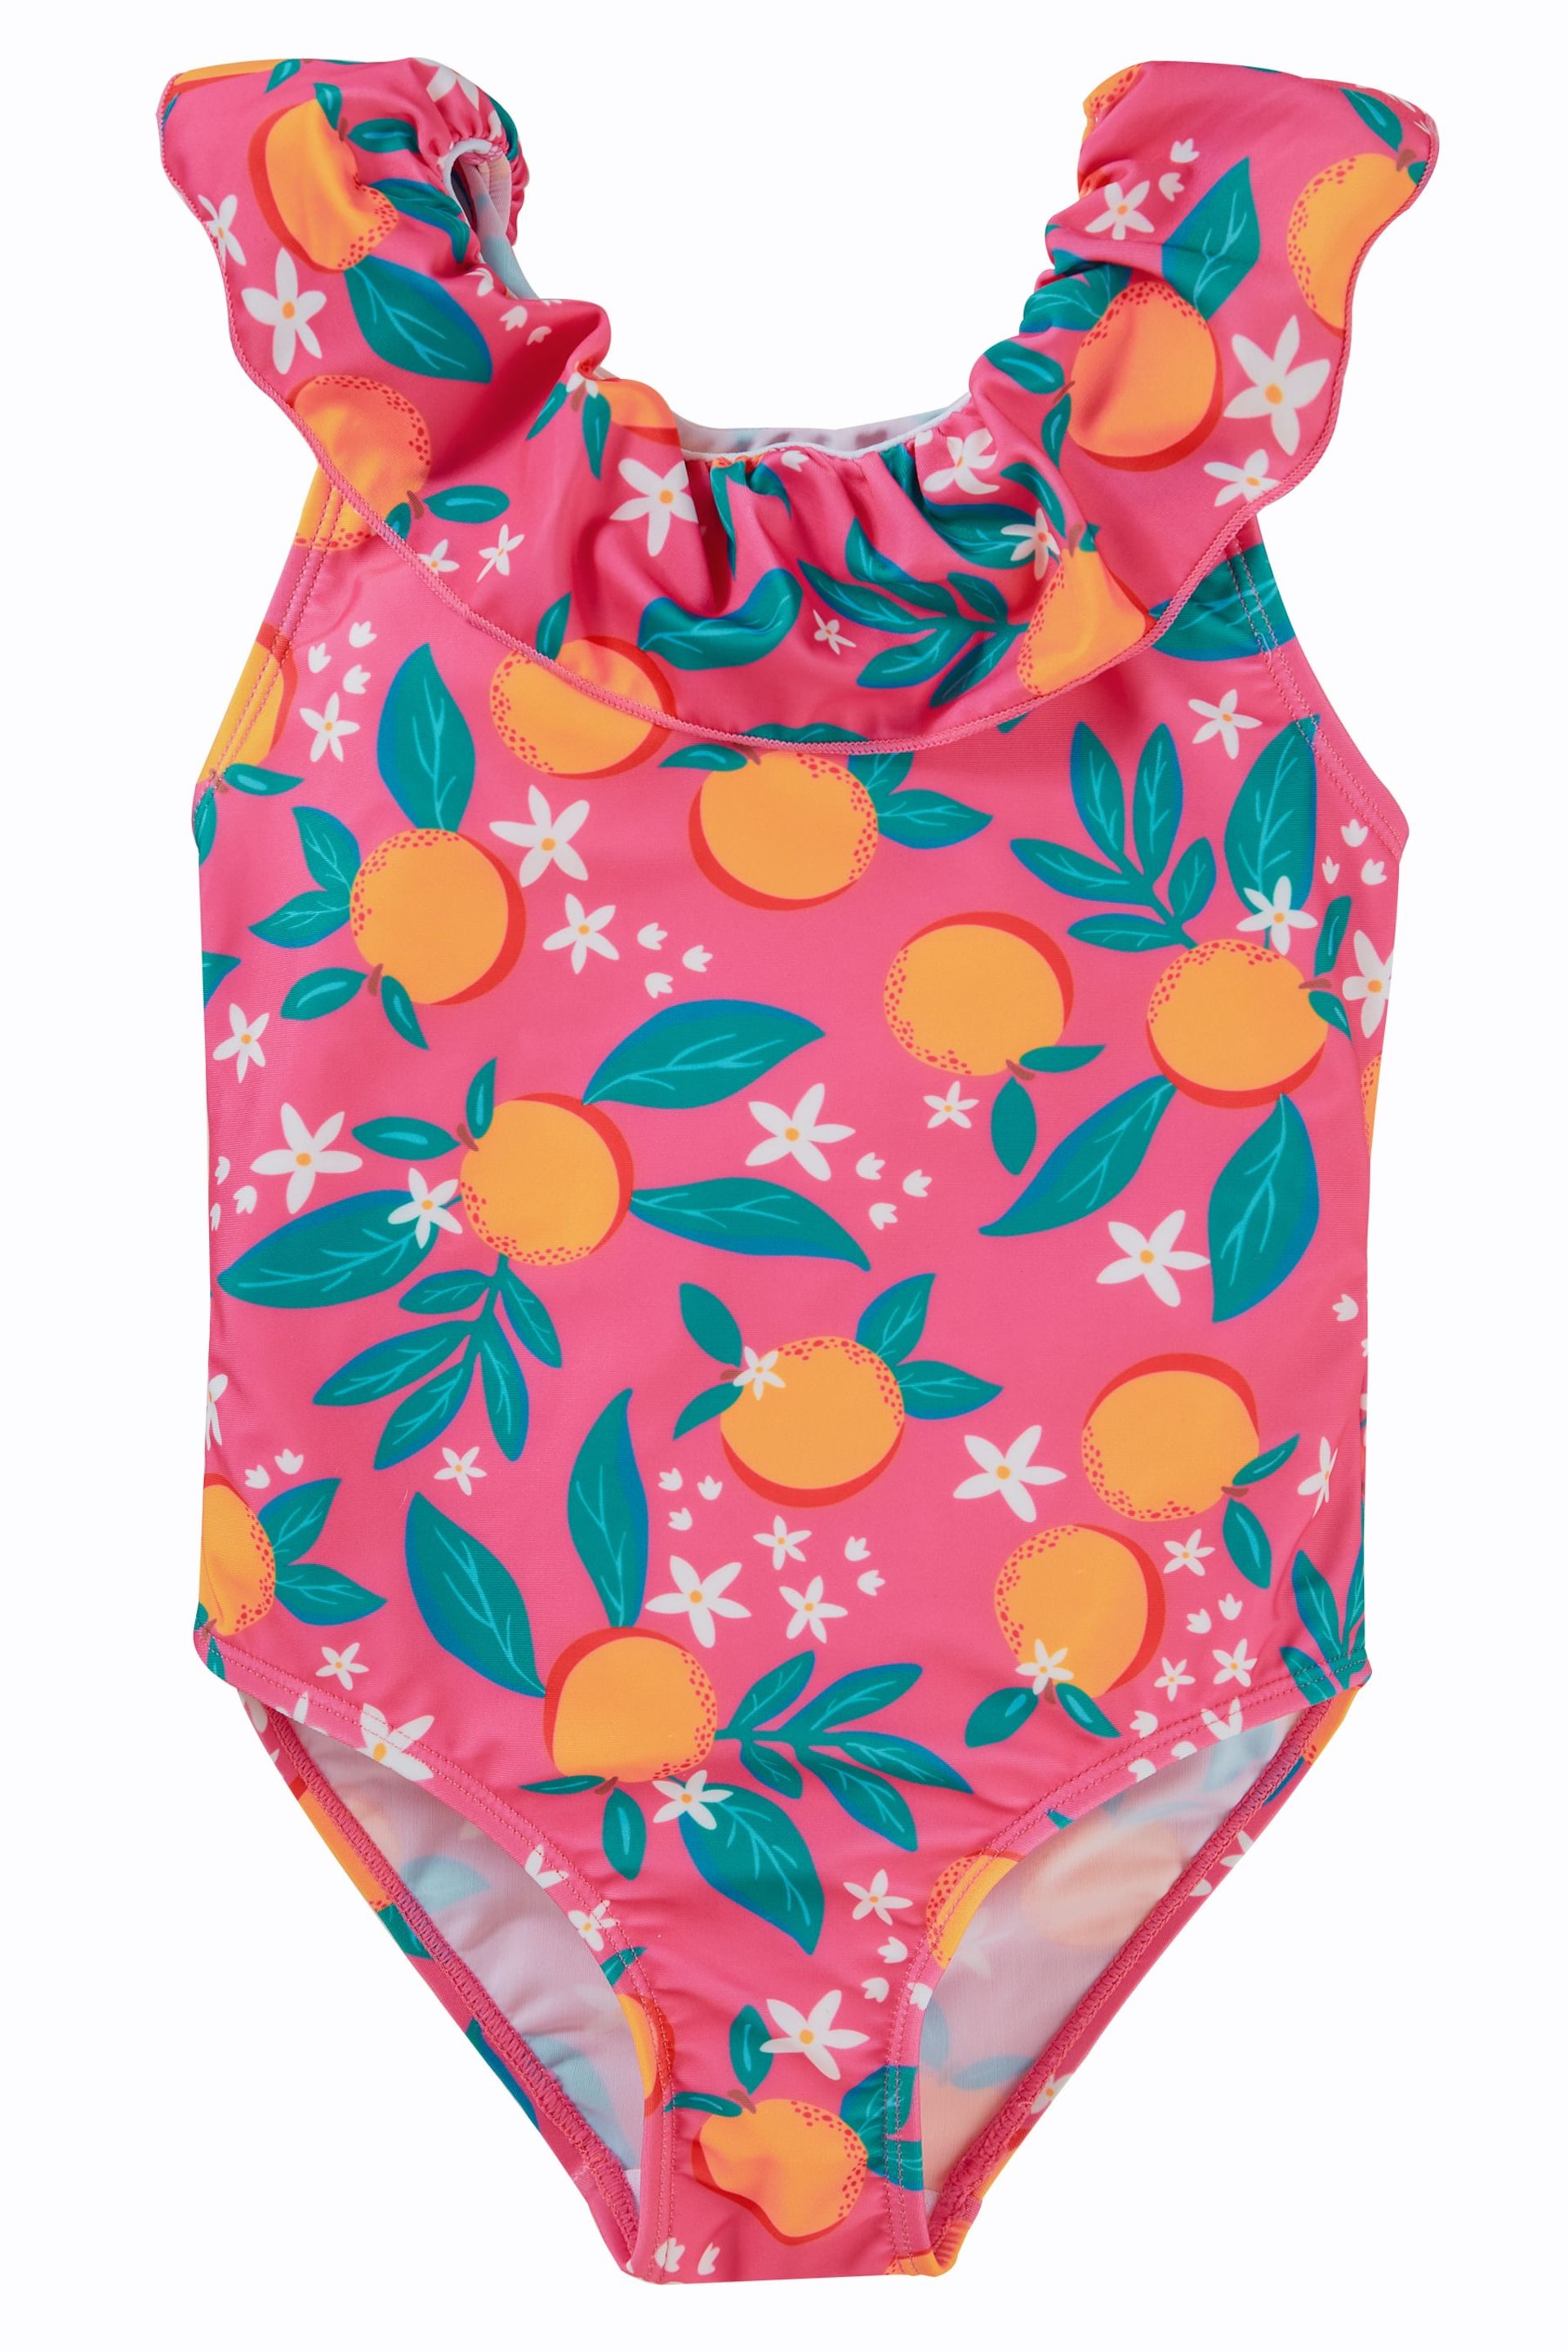 Frugi Pink With Print Chlorine Safe Swimsuit Made With Recycled Material - Image 1 of 4